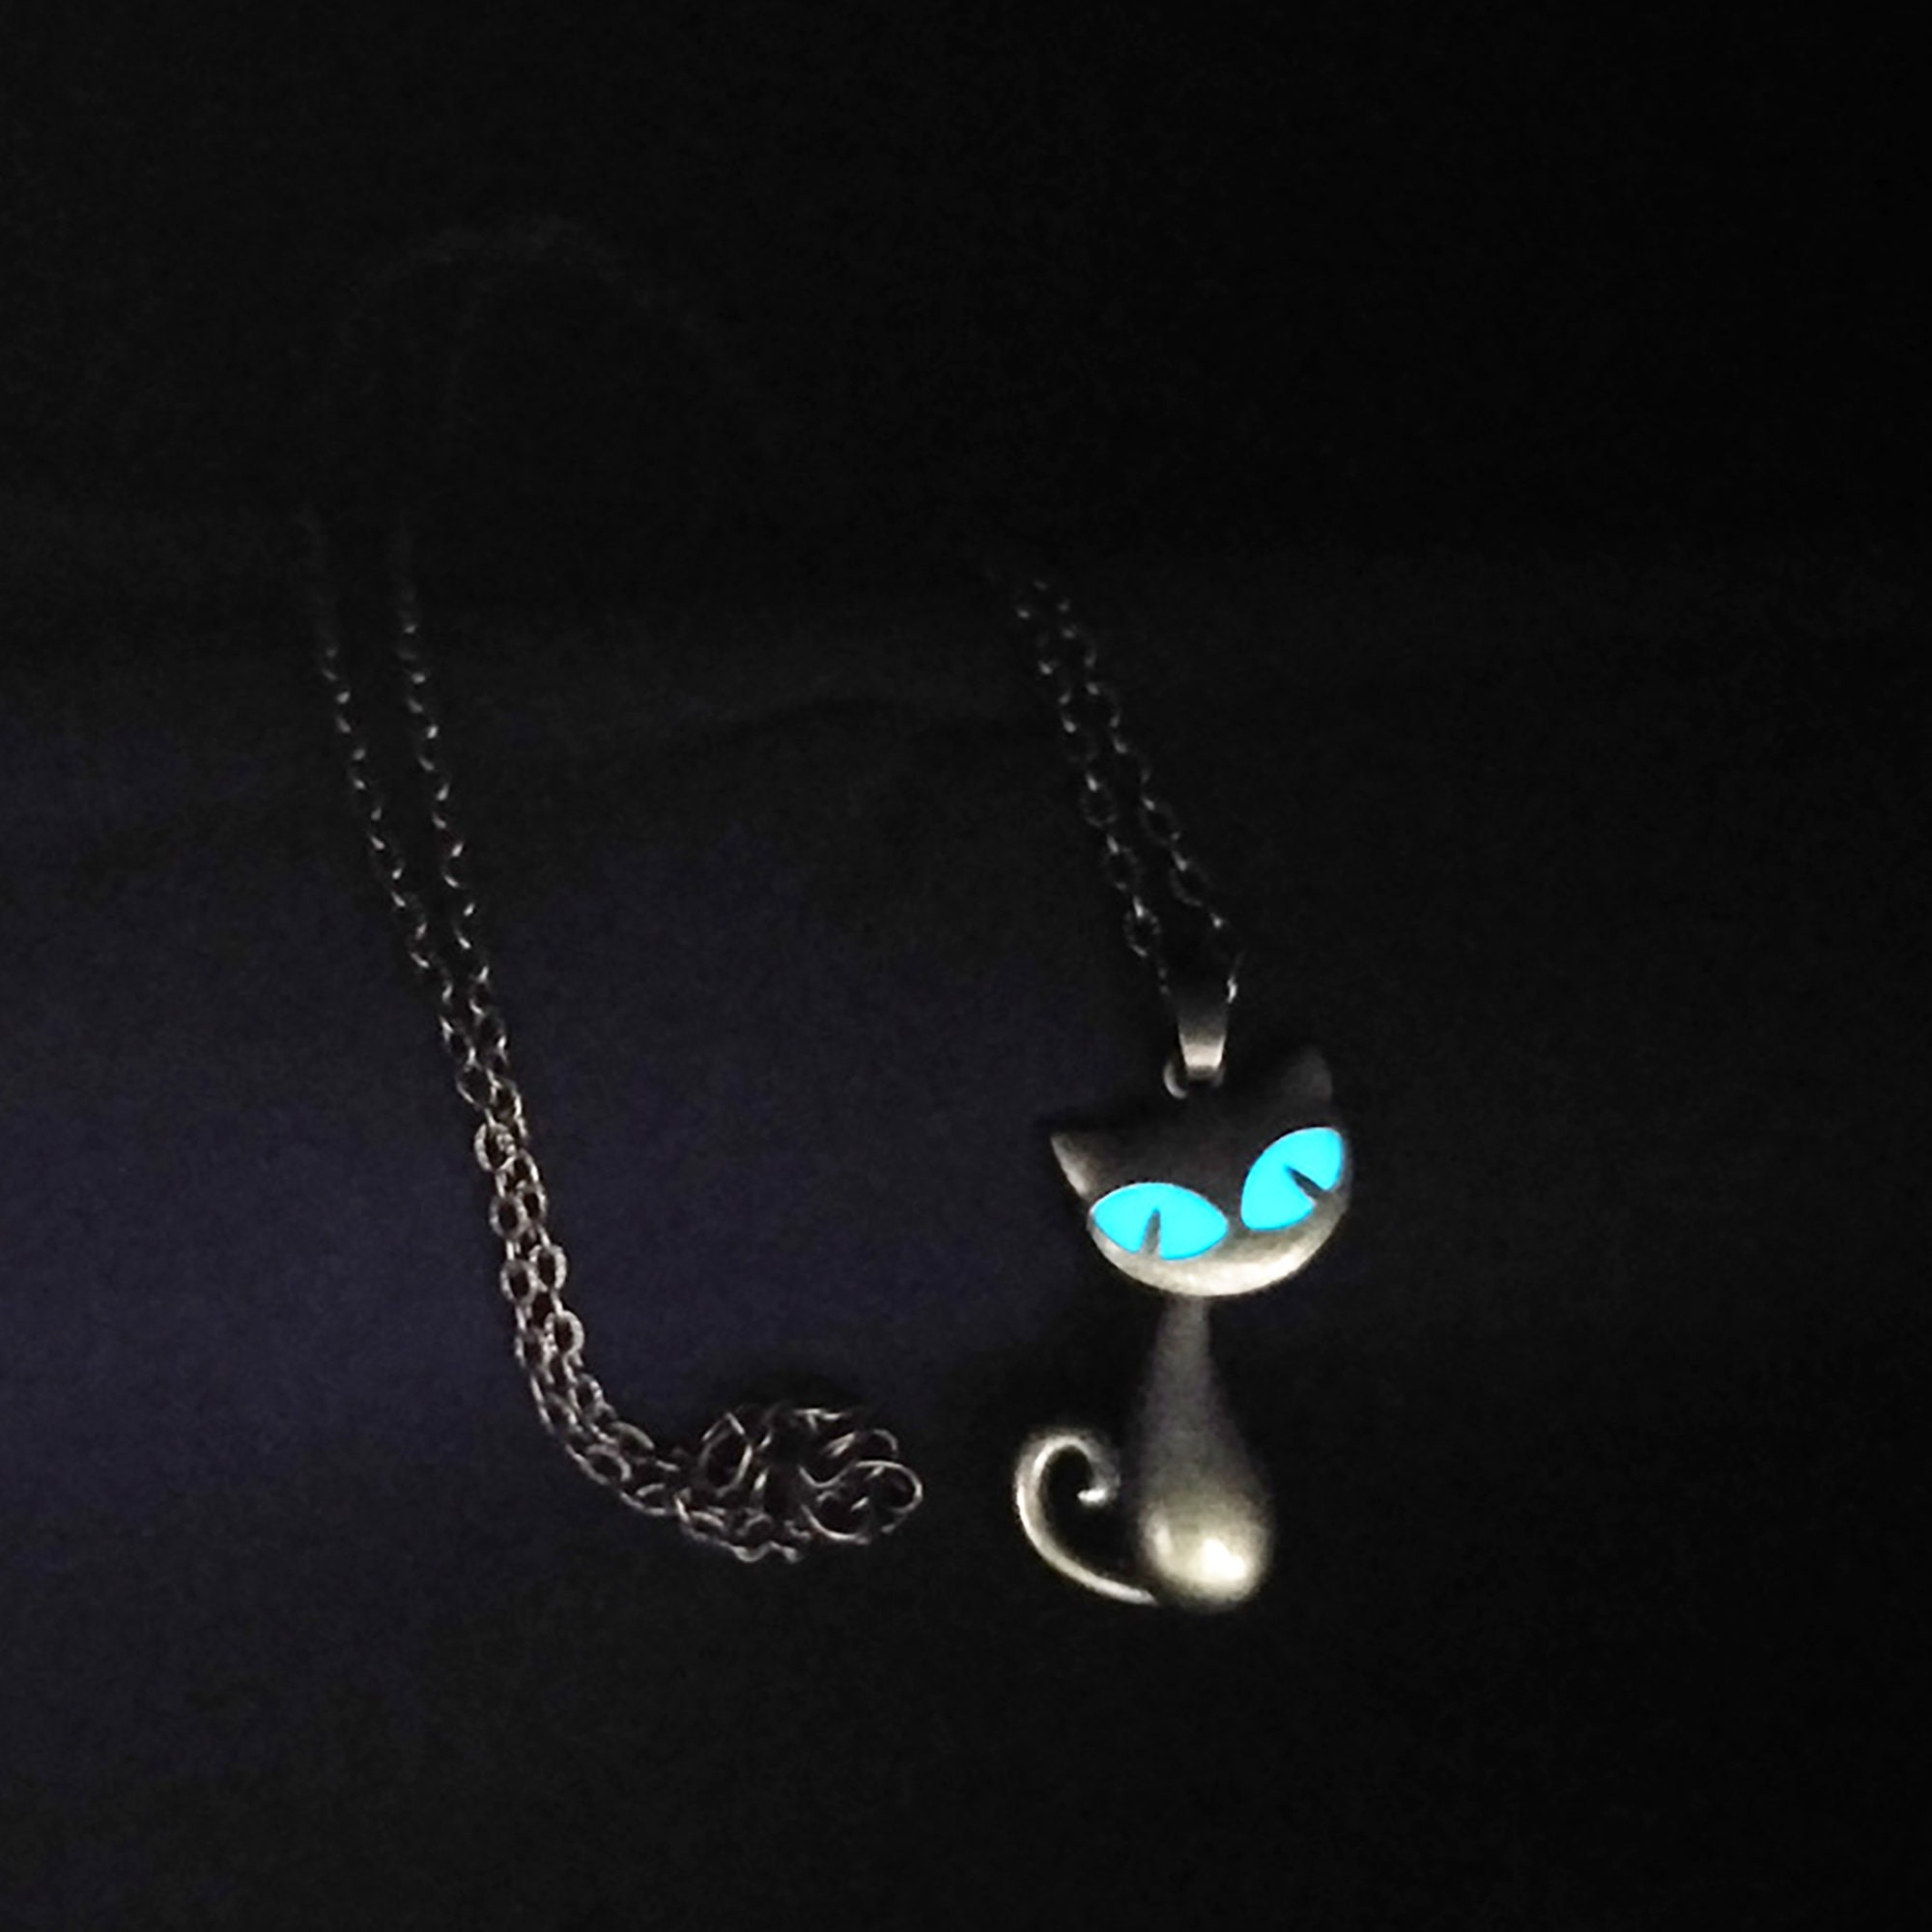 Glow in The Dark Galaxy Charm Necklace - Stars Nebula Glowing Galaxy Pendant - 23 Space Images Available, 20mm or 25mm Size